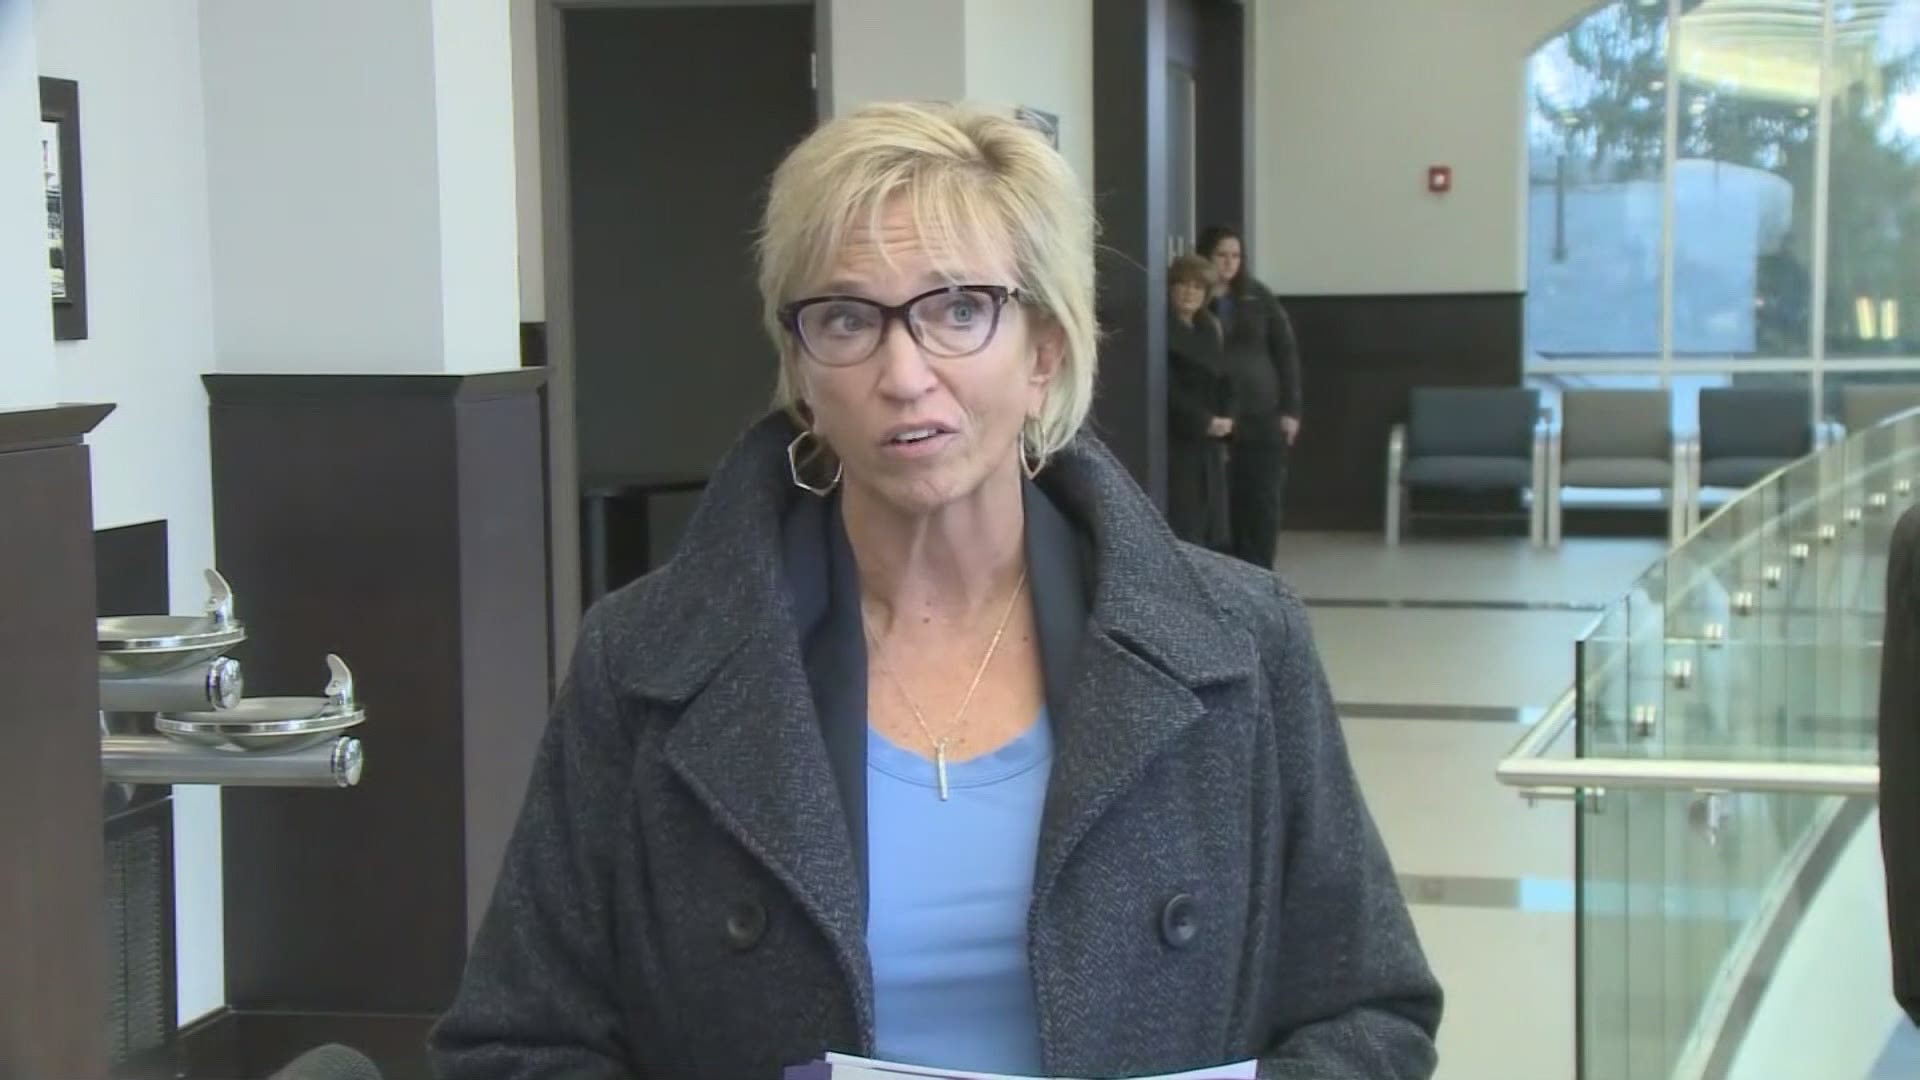 Feb. 15, 2019: Shortly after pleading guilty to OVI, Portage County Common Pleas Judge Becky Doherty spoke briefly with reporters.